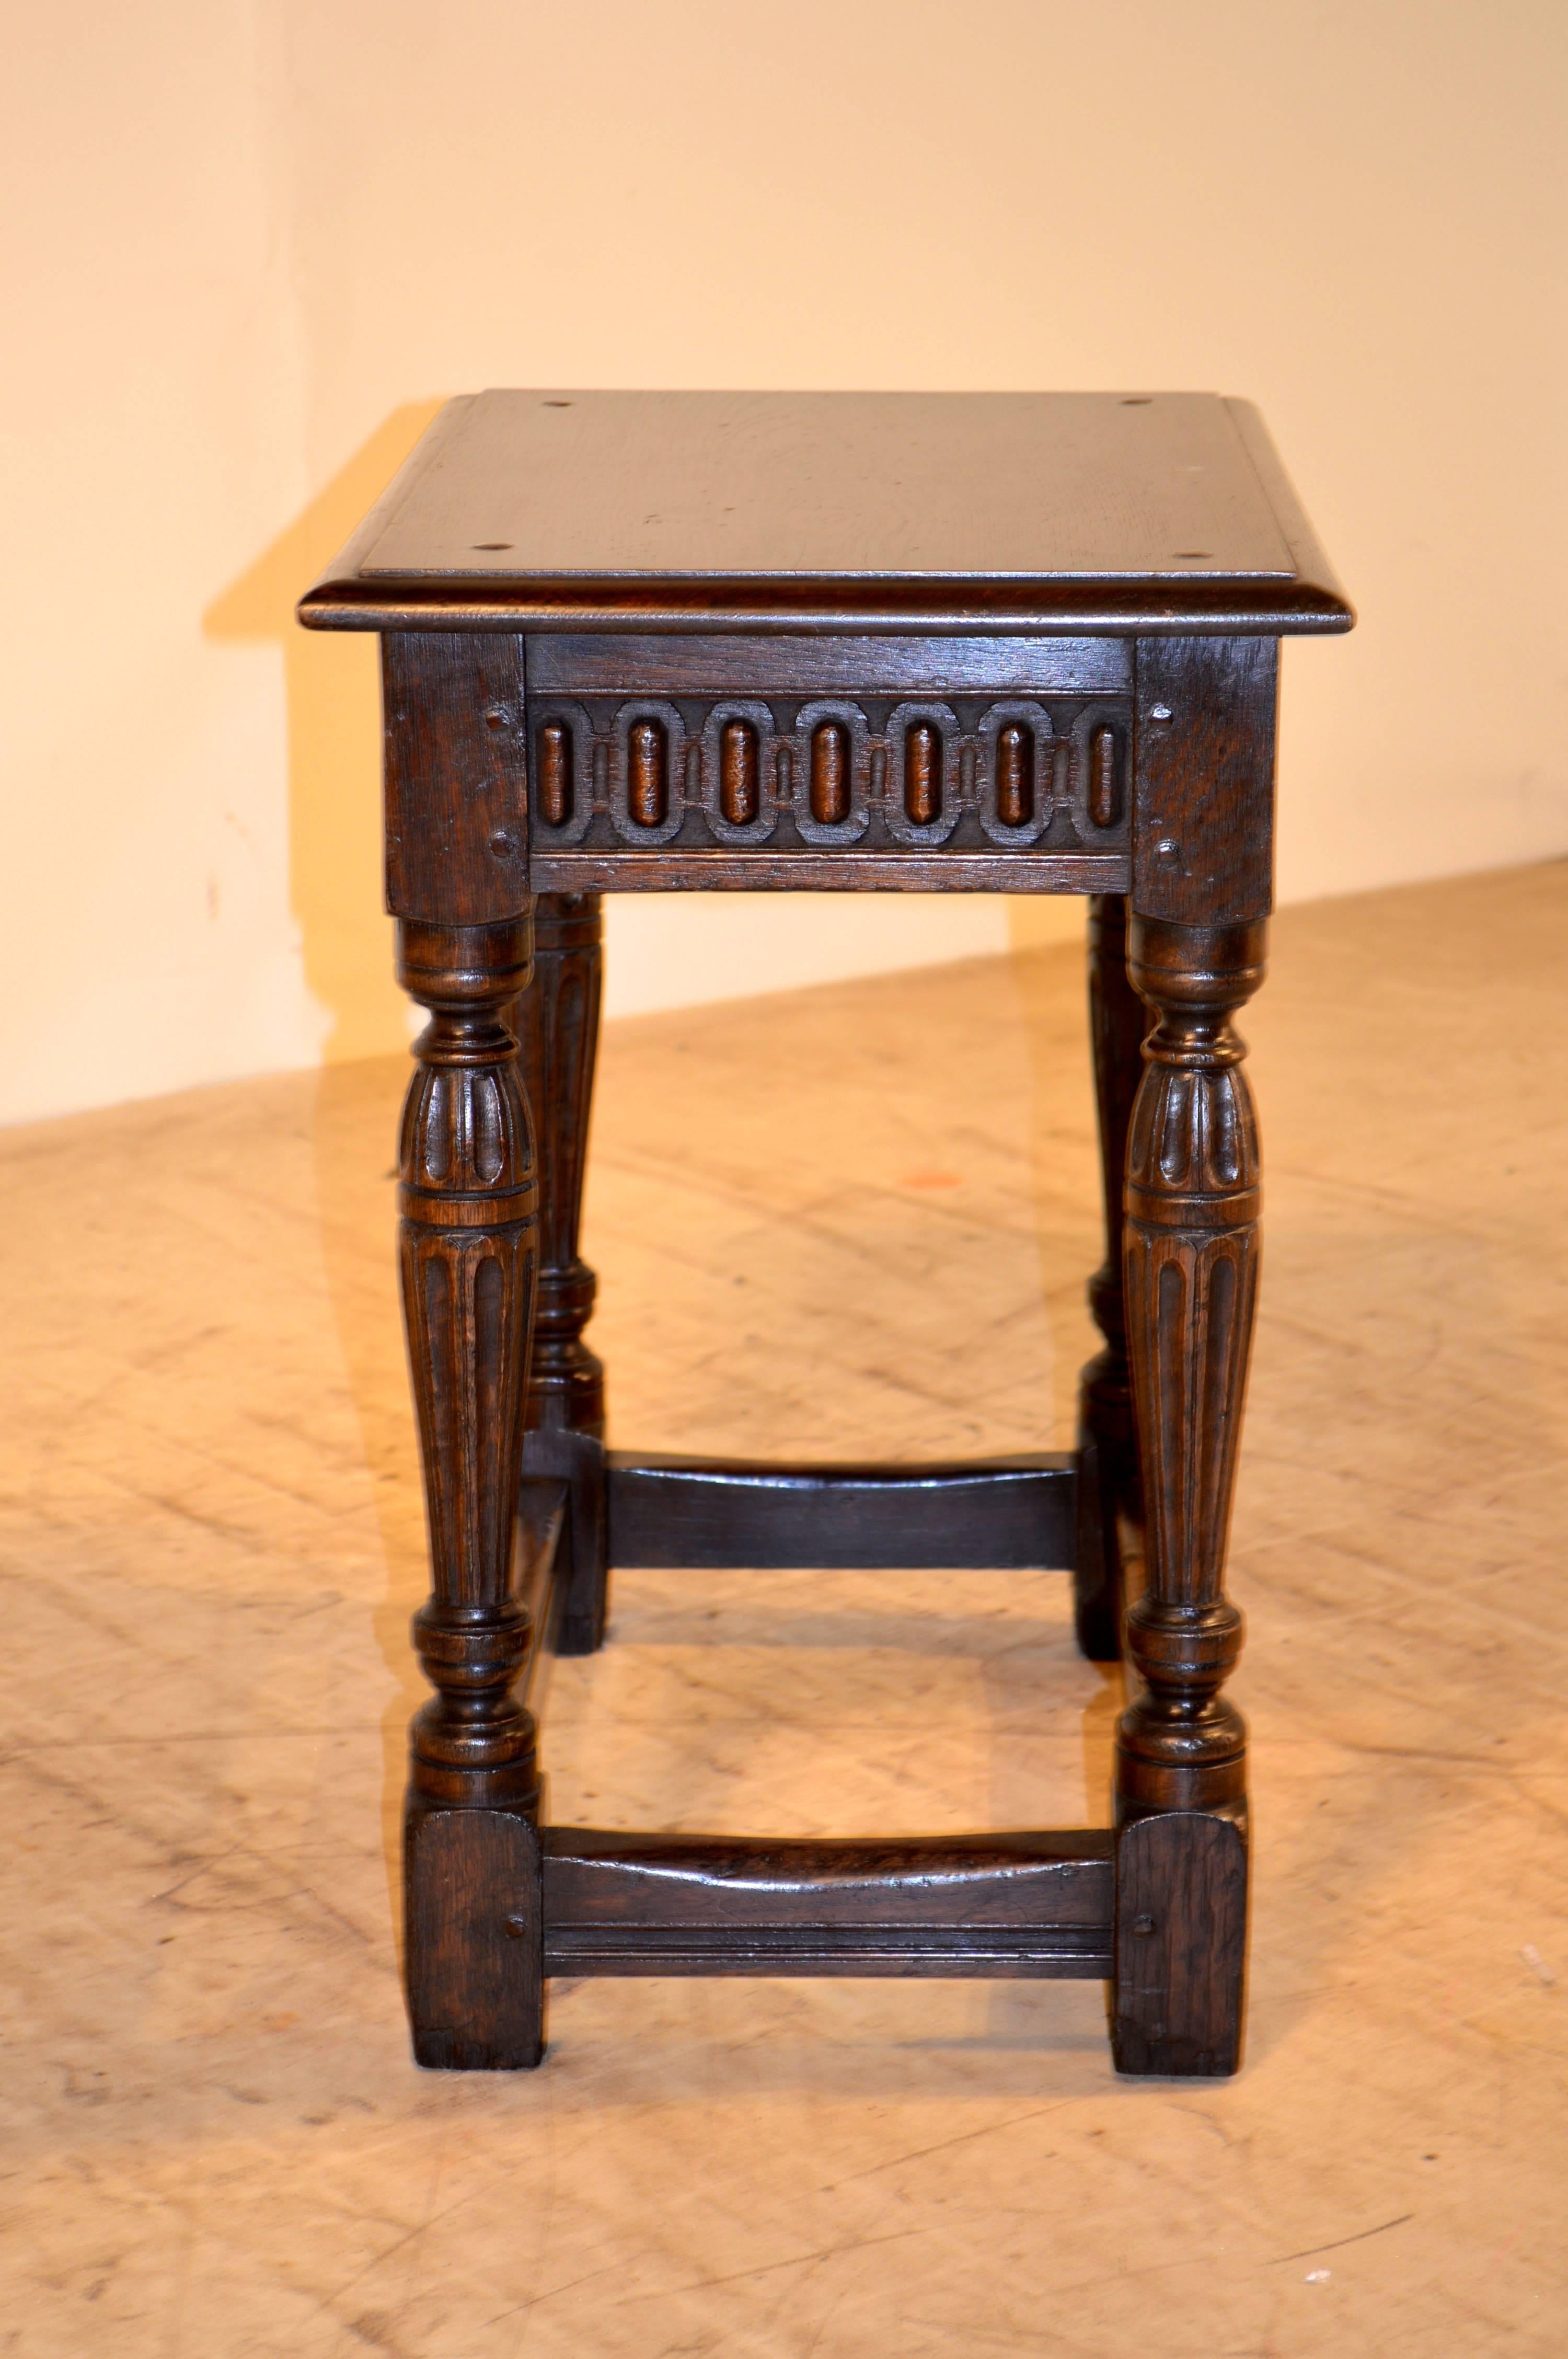 Large 19th century English oak joint stool with pegged construction and a beveled edge around the top. The apron has carved decoration and follows down to fluted carved legs joined by stretchers.